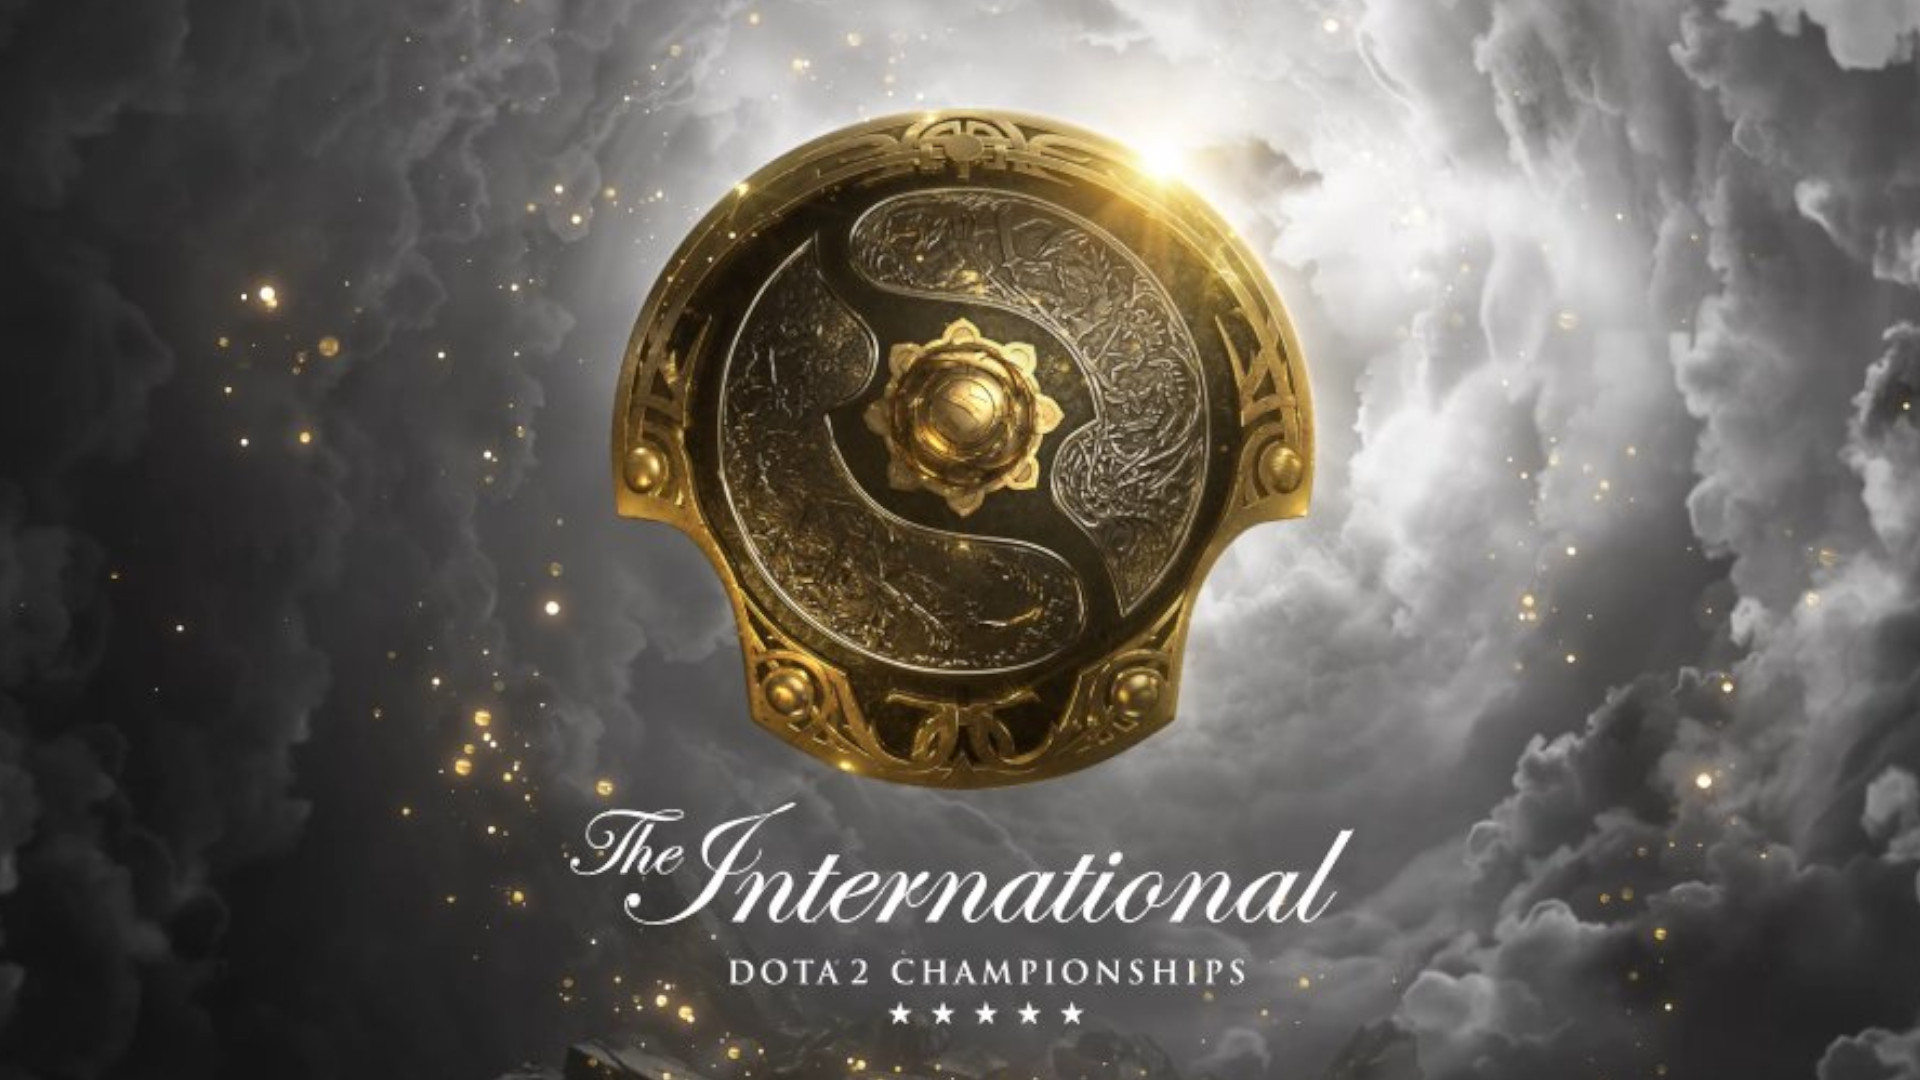 Dota 2’s The International gets new dates after Sweden says no to esports